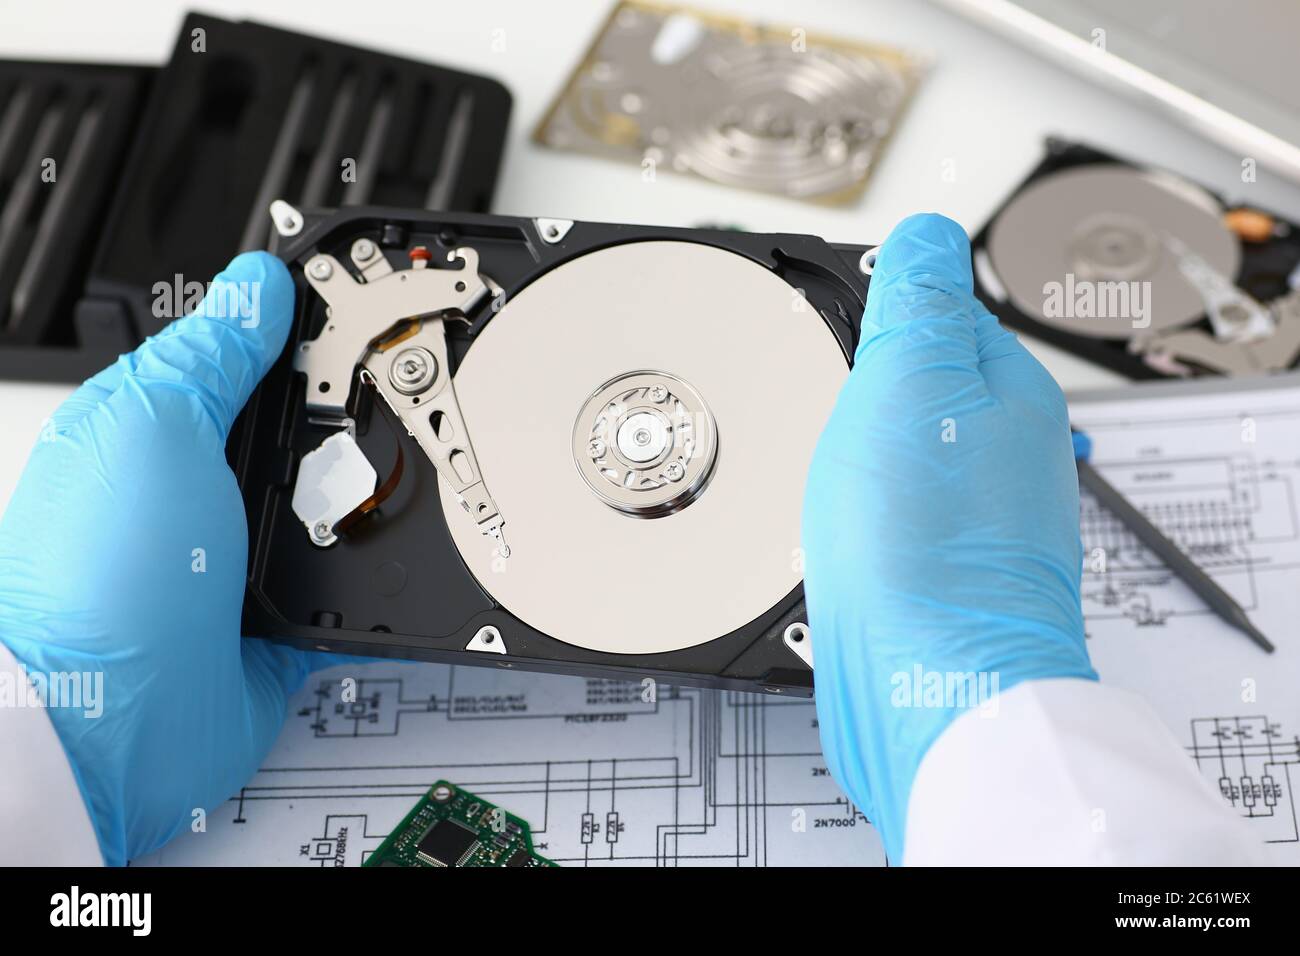 Image of the inside of the hard drive on the table Stock Photo